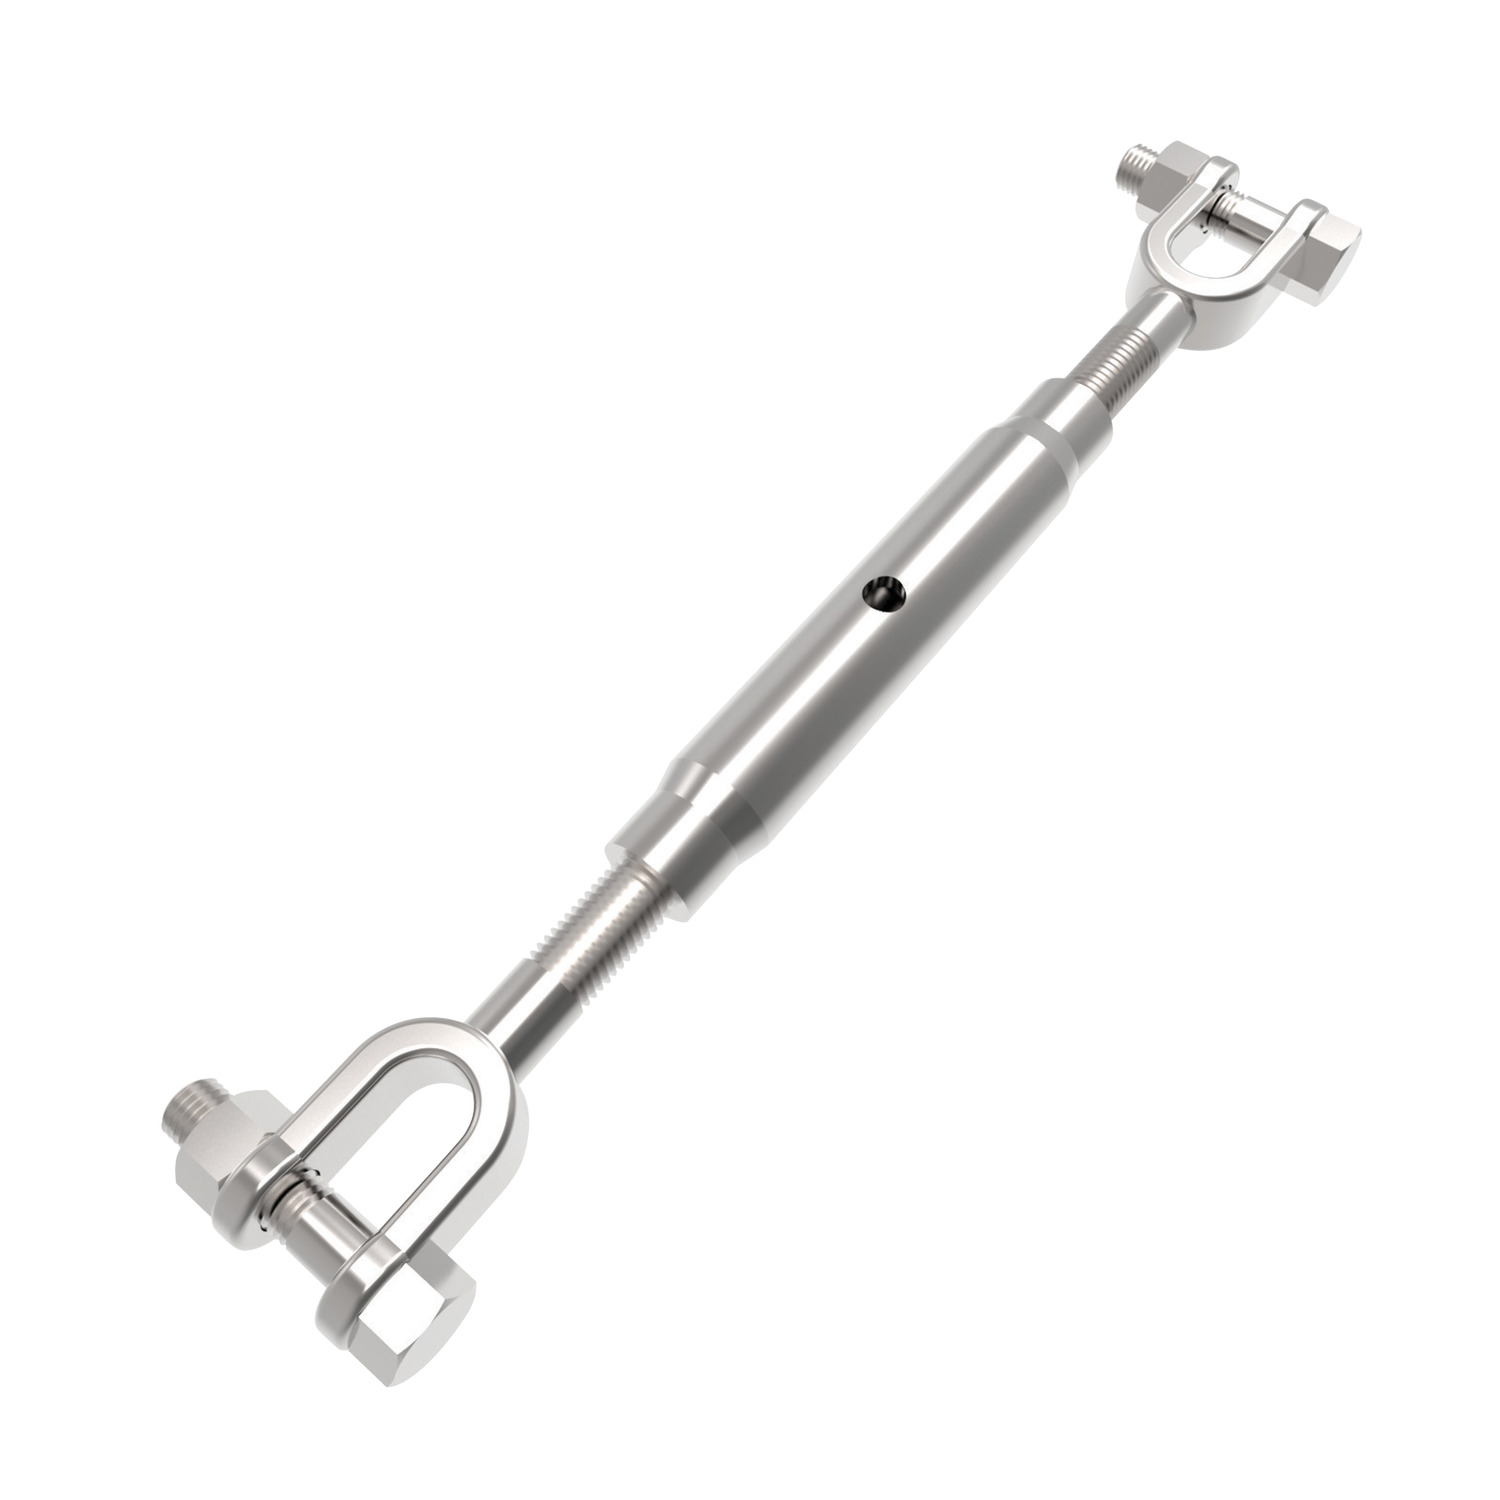 R3820 Jaw End Pipe Body Turnbuckles